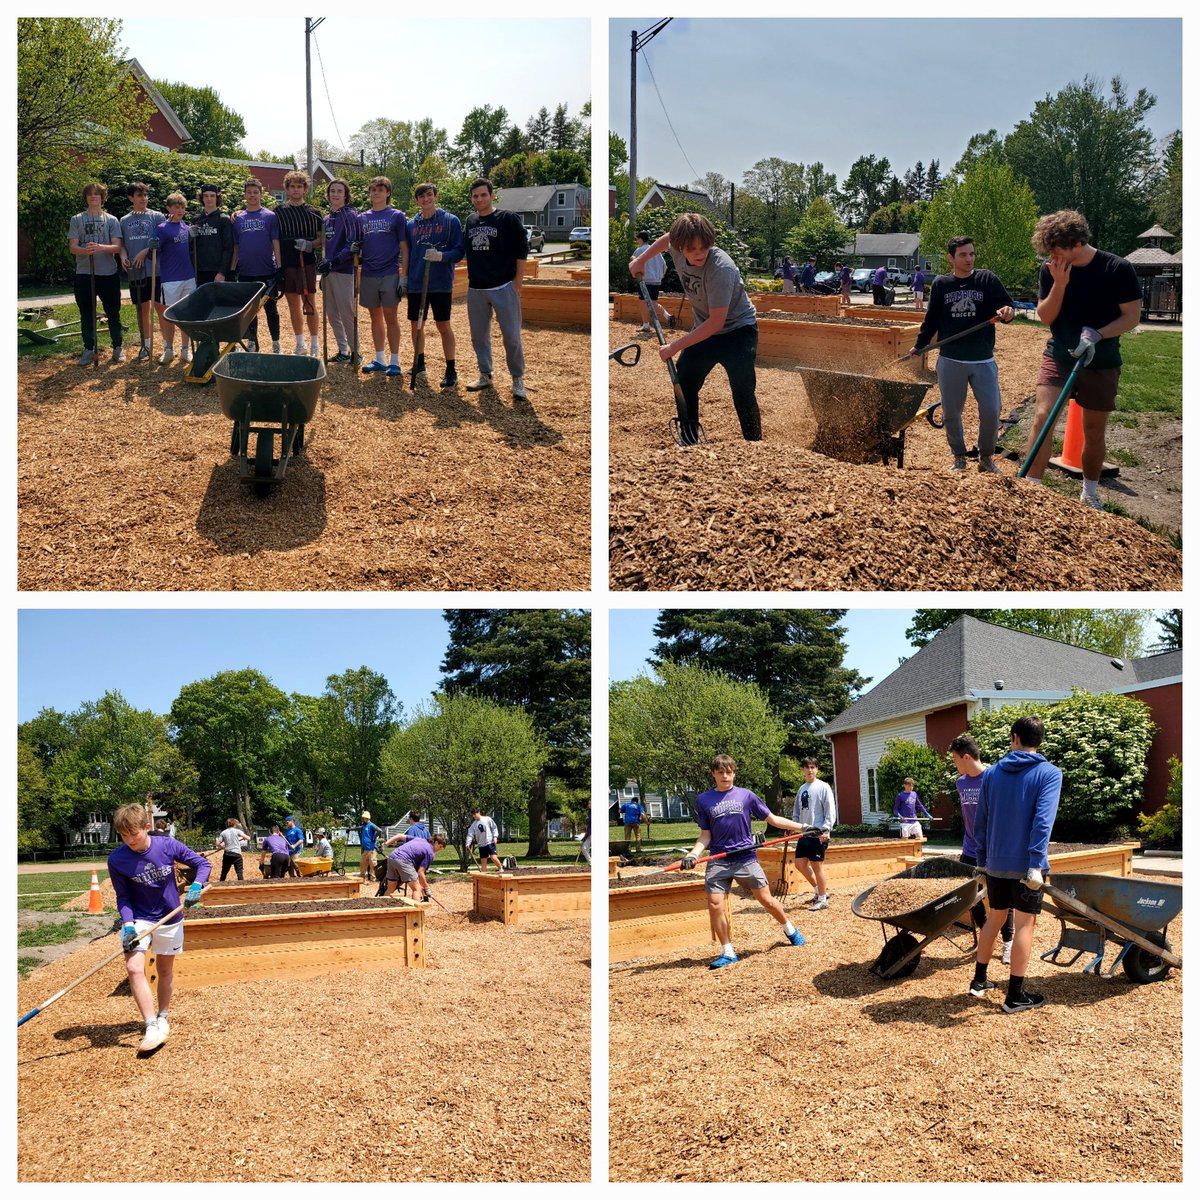 Love seeing our community pitch in to grow goodness. @HeeterSeth @HamburgCSD Varsity Soccer Coach was the 1st to respond to a call 4 volunteers to move mulch 4 the new @VillageHamburg Community Foundation garden space. The soccer team did an great job! Way to represent Bulldogs!